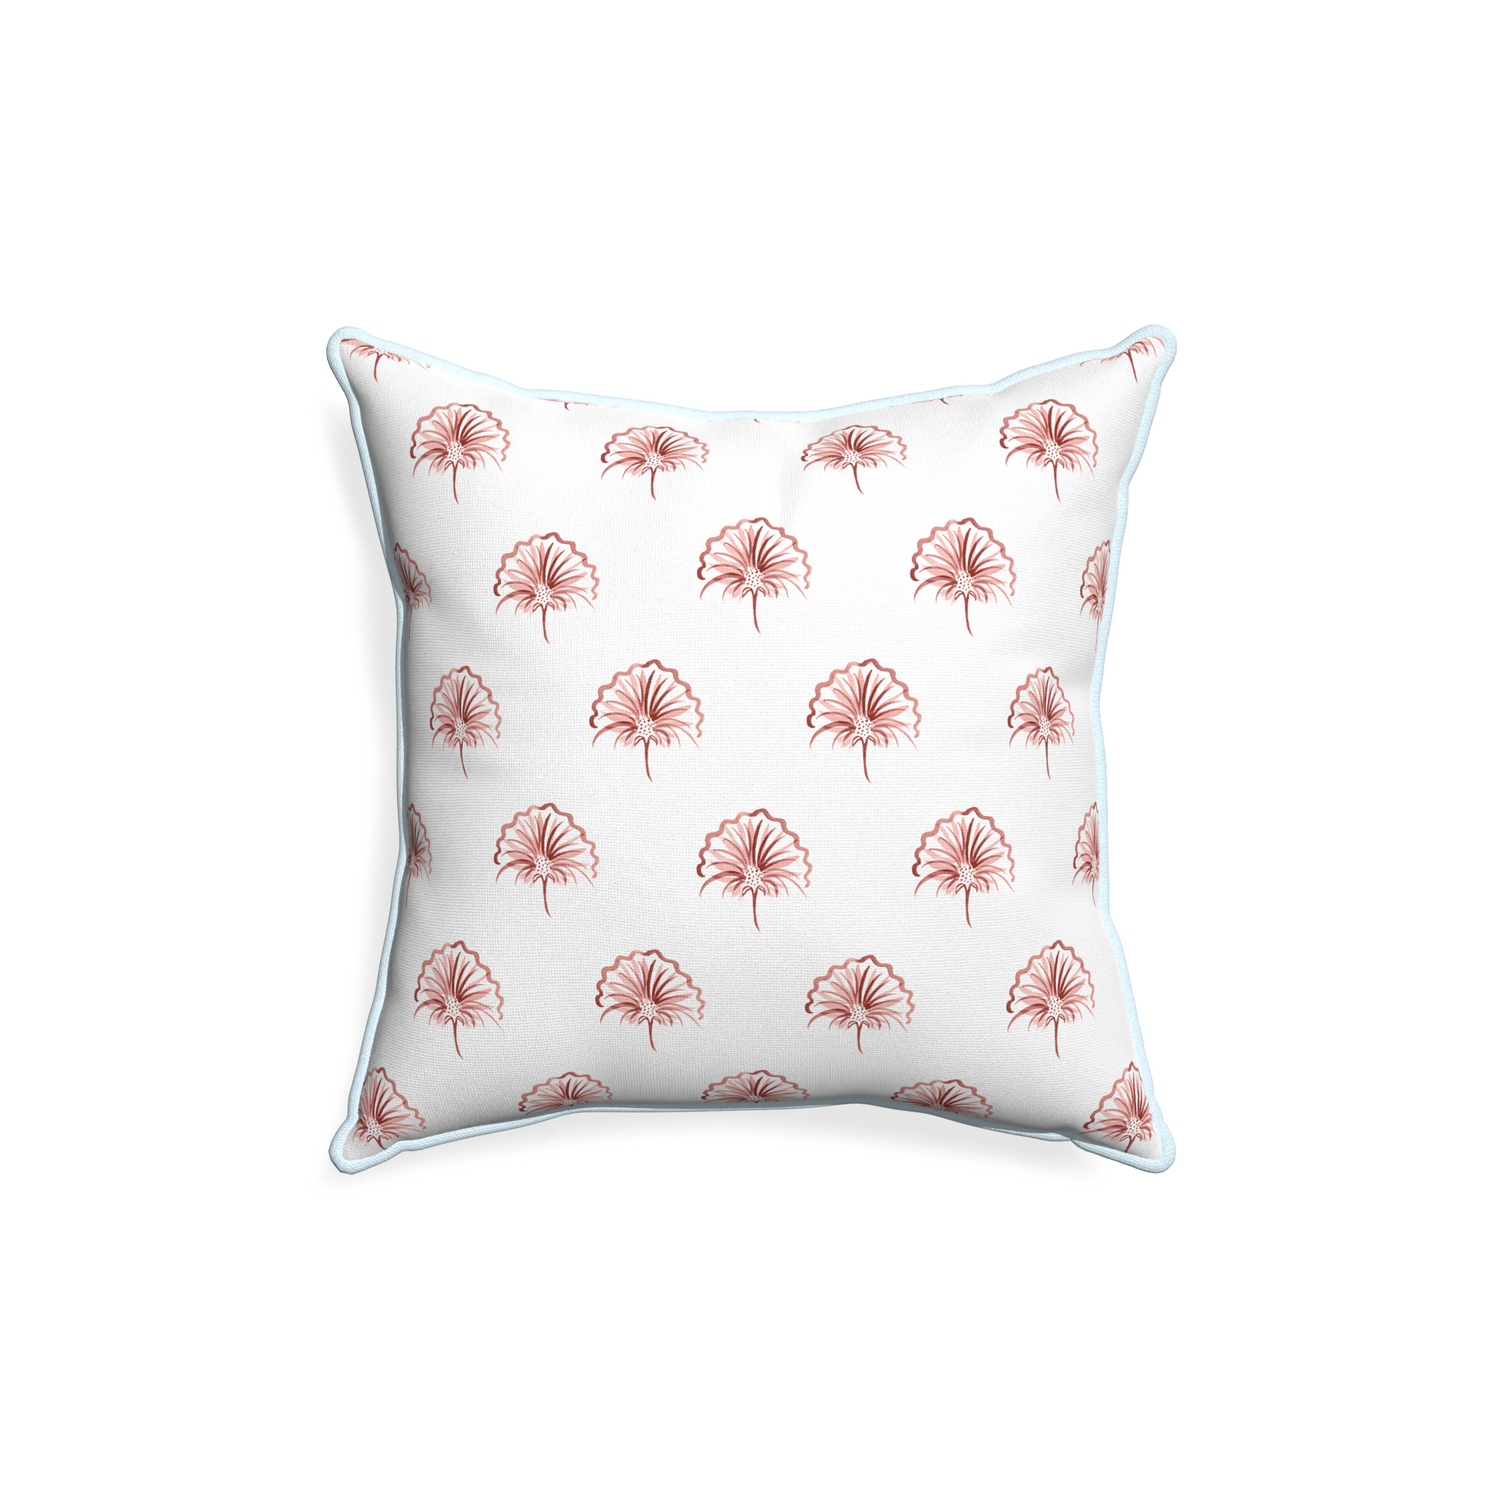 18-square penelope rose custom pillow with powder piping on white background